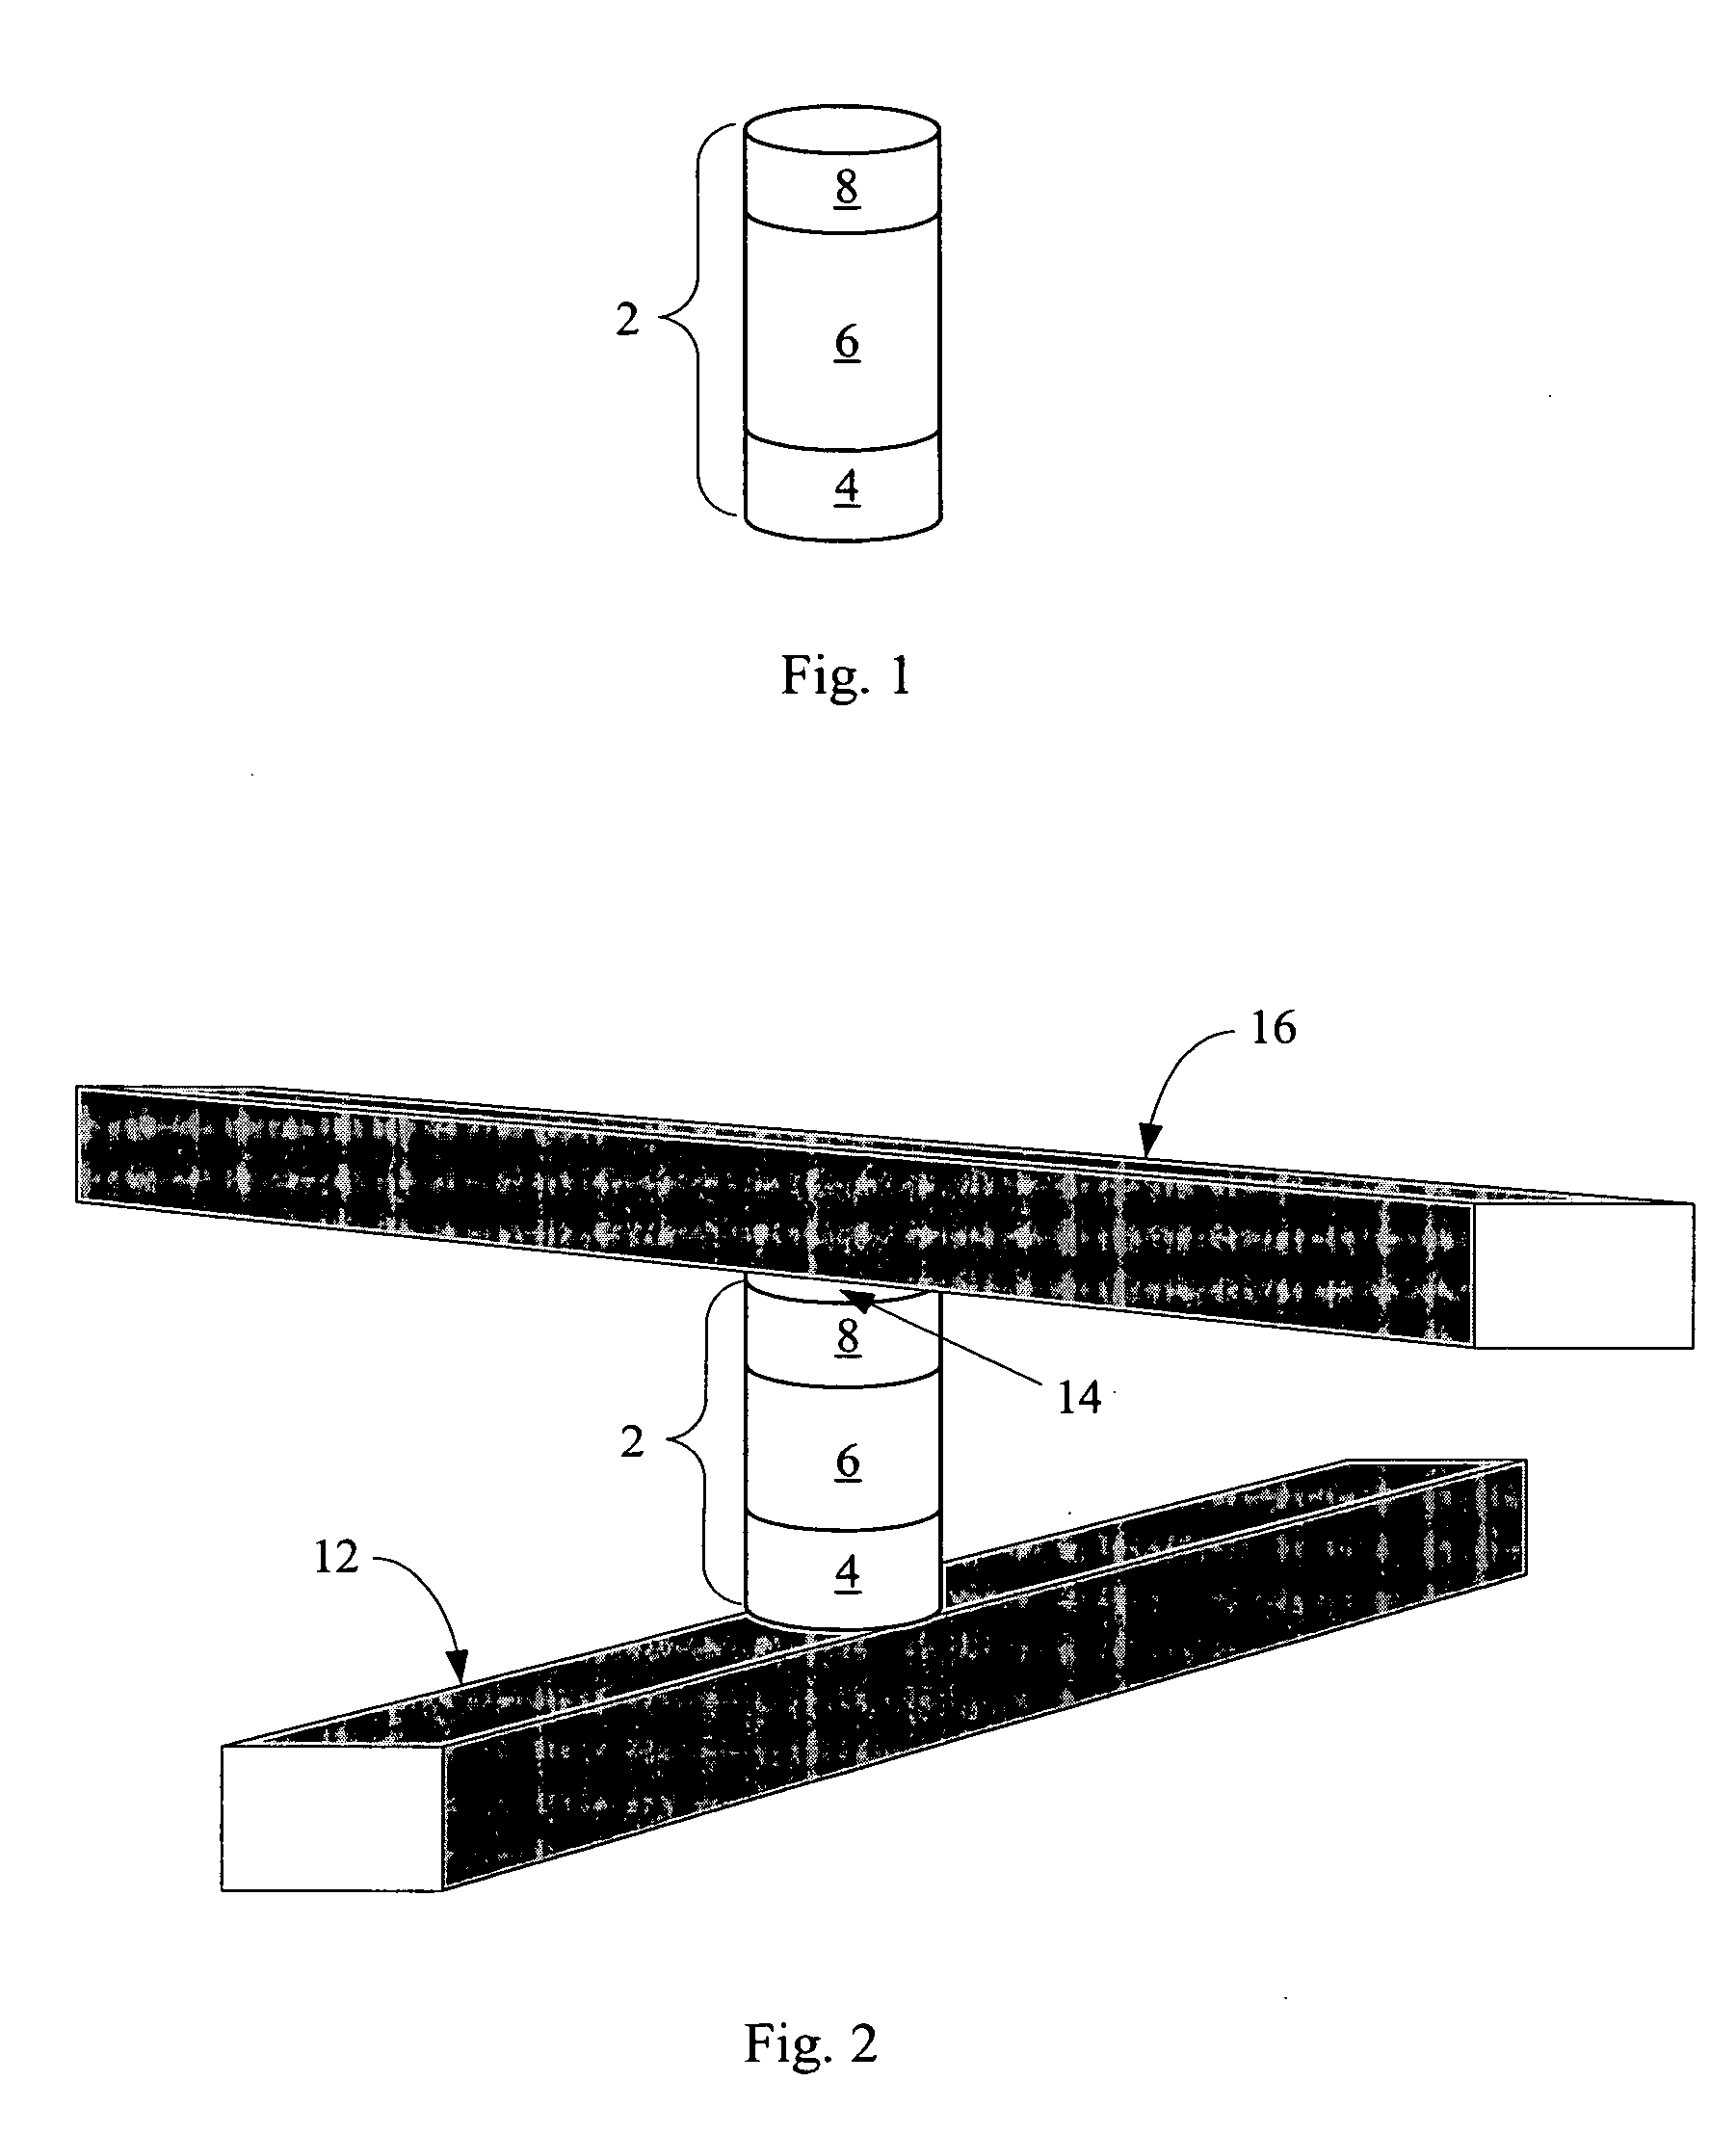 Vertical diode doped with antimony to avoid or limit dopant diffusion